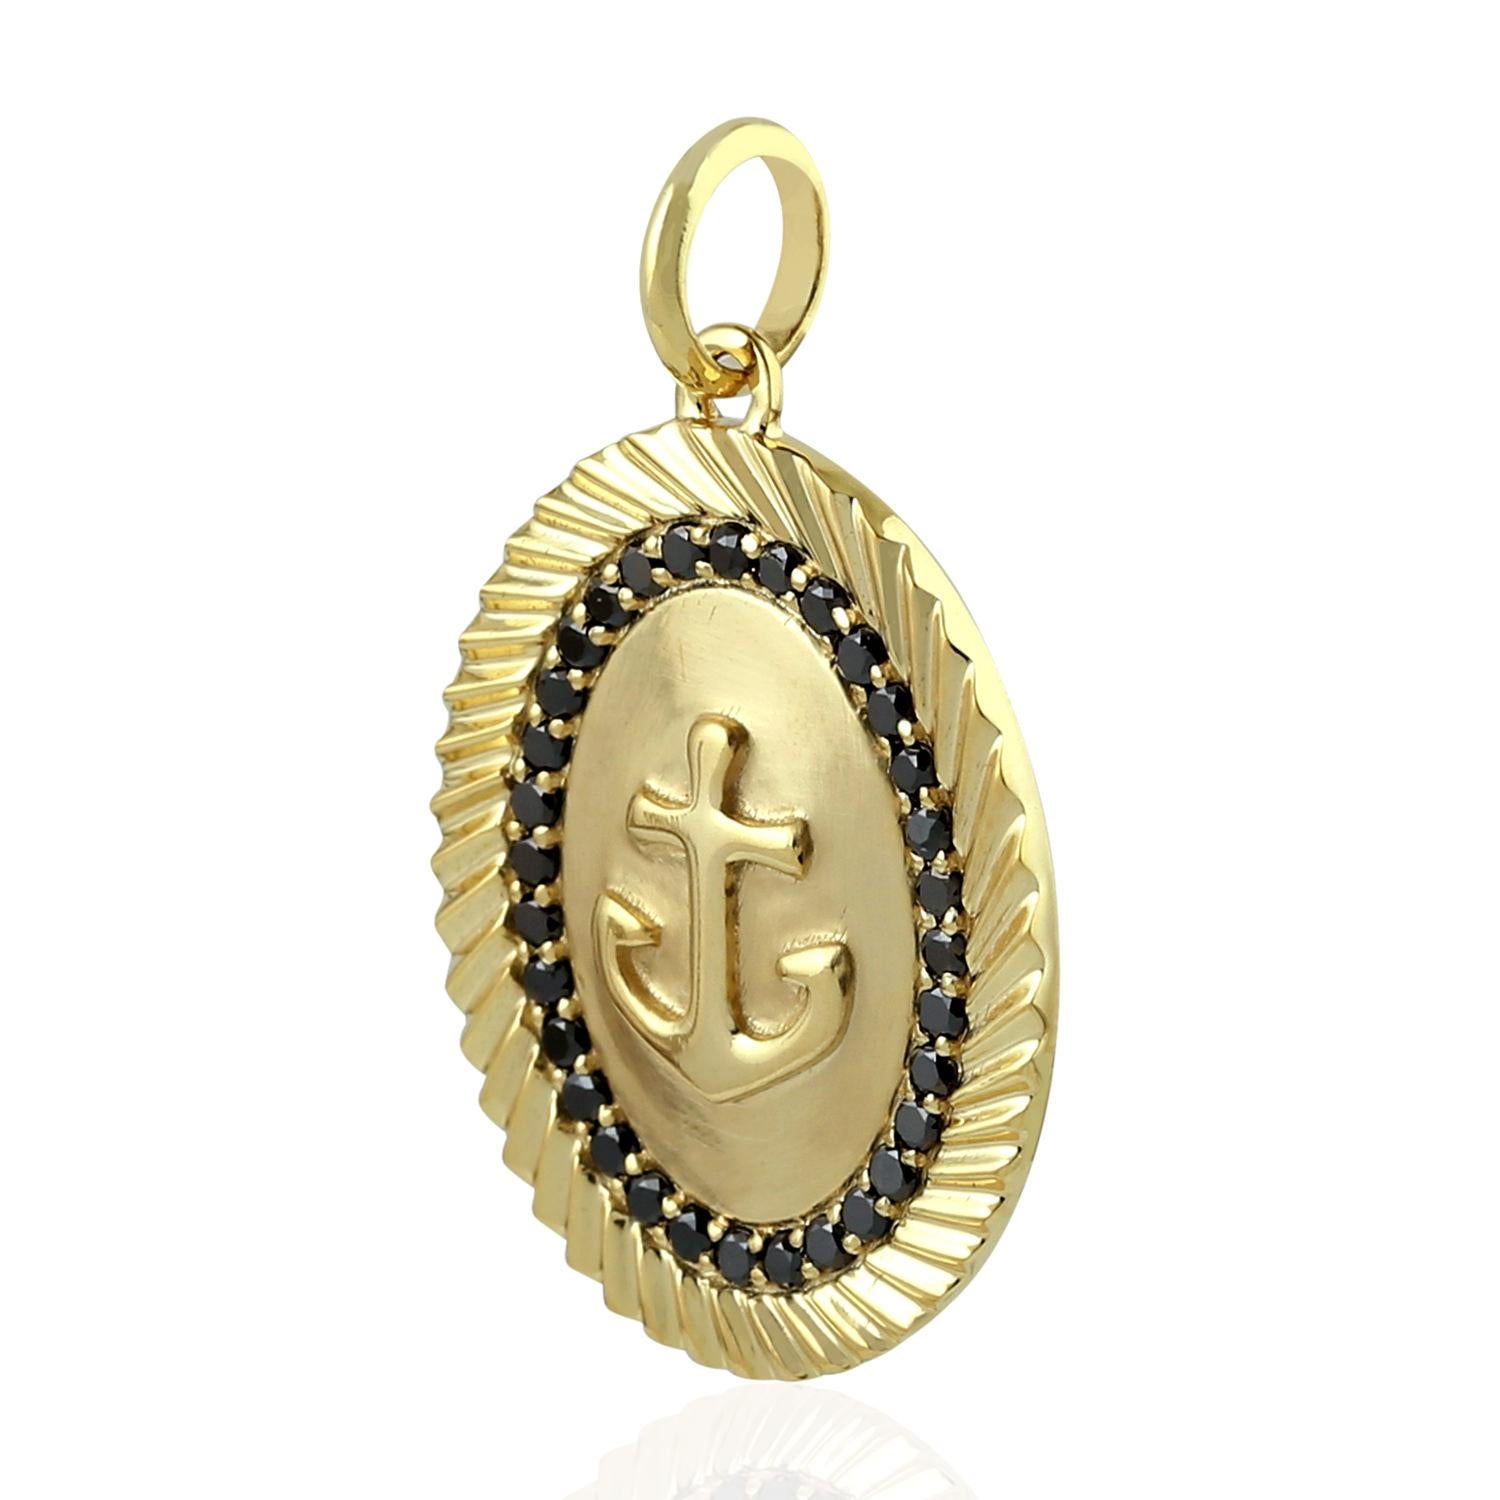 The 14 karat gold pendant medallion is set with .29 carats of shimmering diamonds. Anchor symbolizes strength.  It represents a secure and stable person. A person that is firmly grounded in their beliefs and in tune with who they truly are, hold